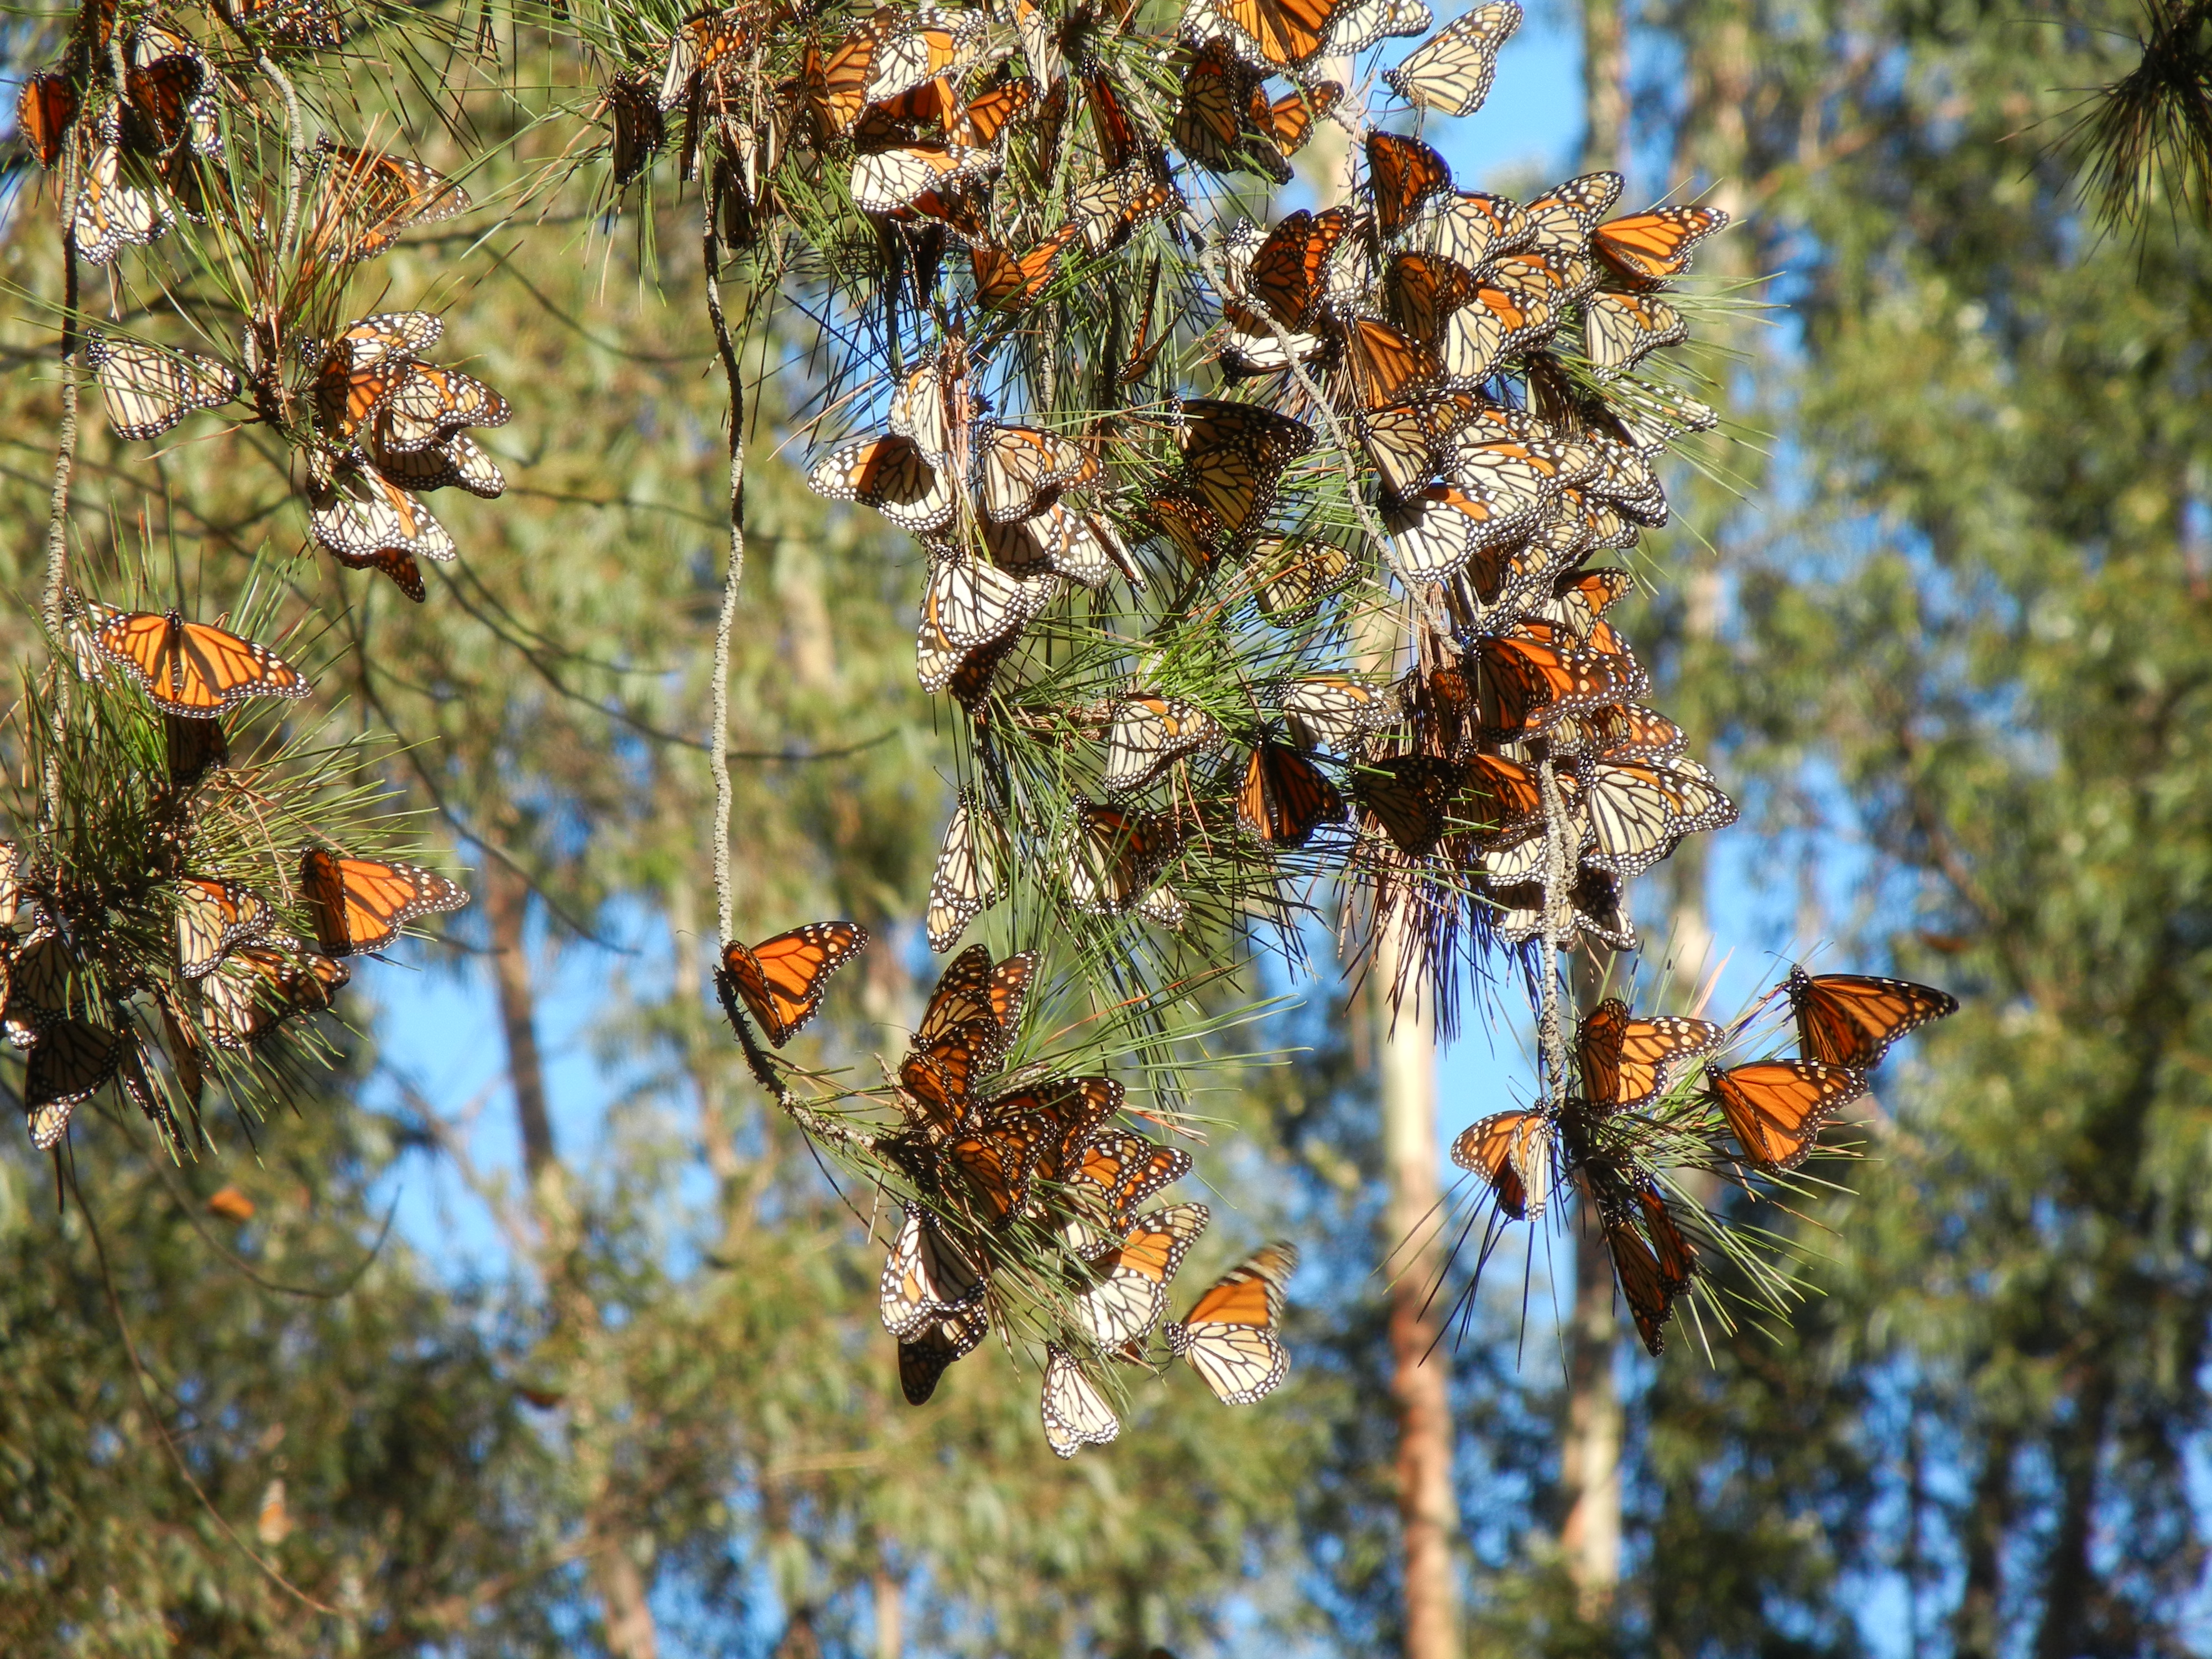 A large group of monarch butterflies clings to a pine branch, with blue sky in the background. The butterflies with closed wings are a dull orange-brown, resembling dead leaves. The butterflies with open wings are bright orange.